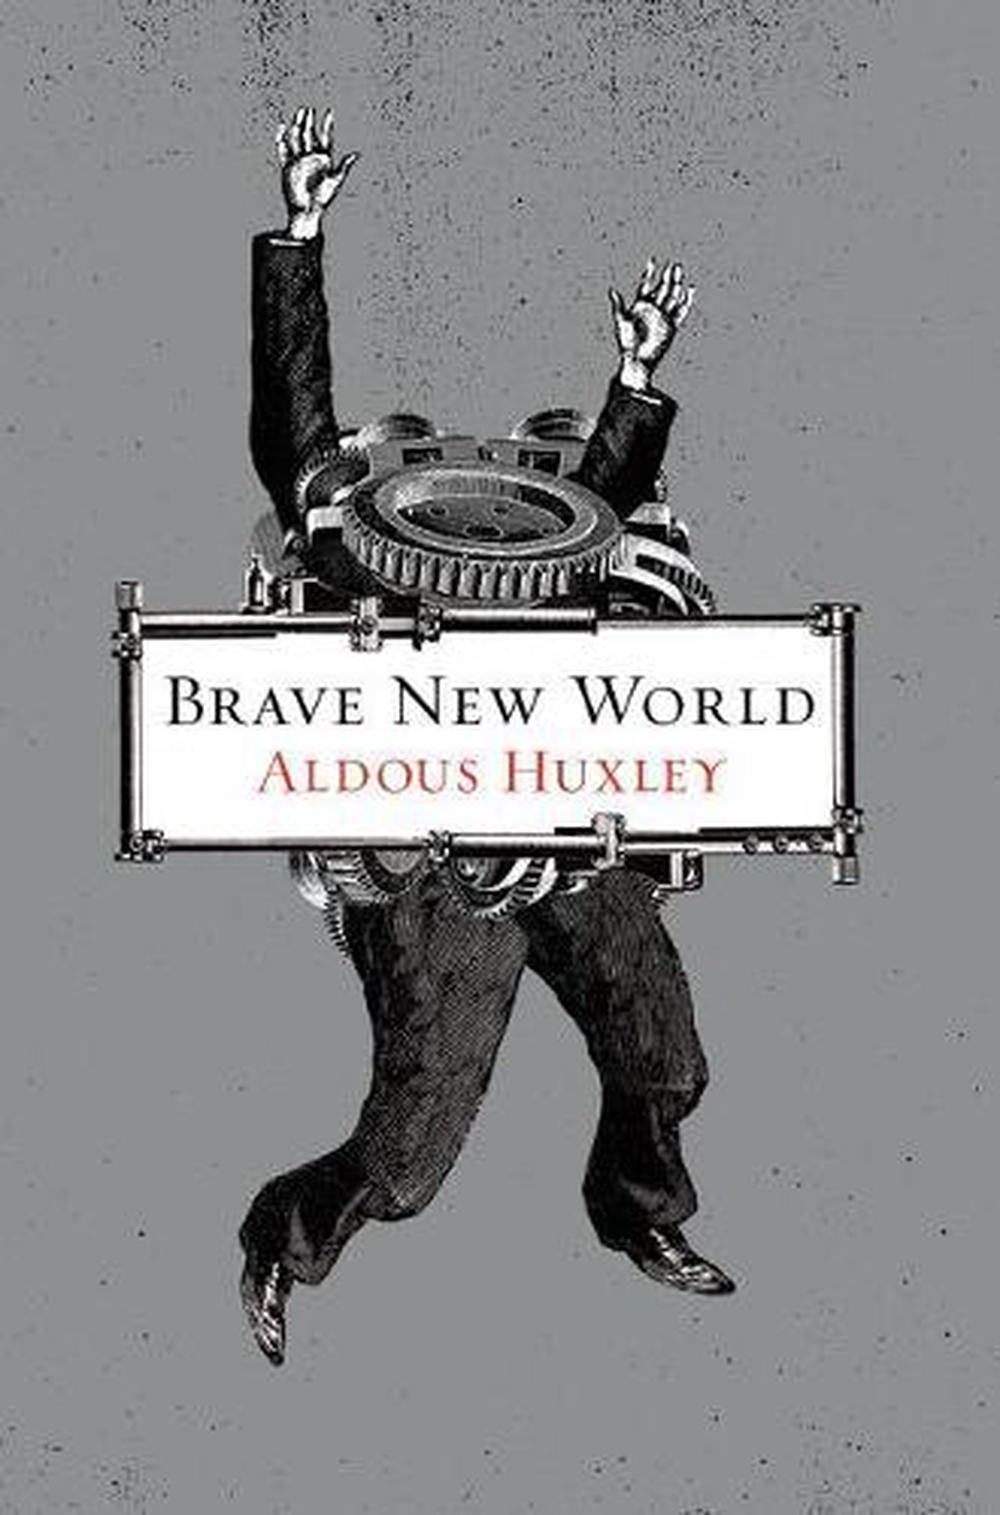 Brave New World Chapter 8 Brave New World by Aldous Huxley, Hardcover, 9780062696120 | Buy online